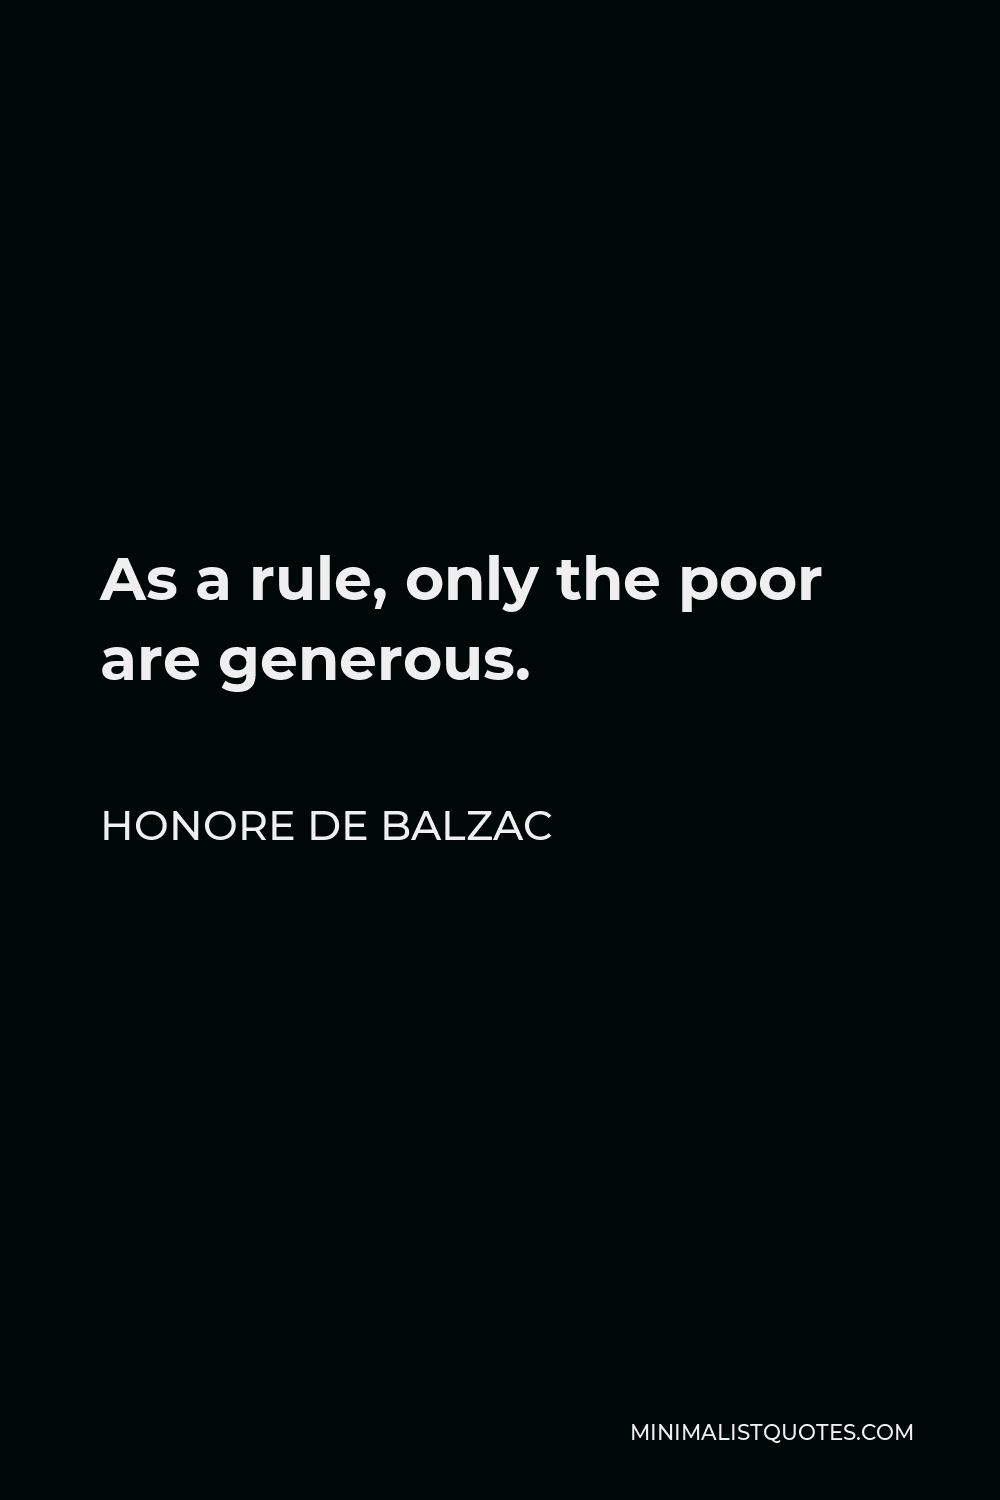 Honore de Balzac Quote - As a rule, only the poor are generous.